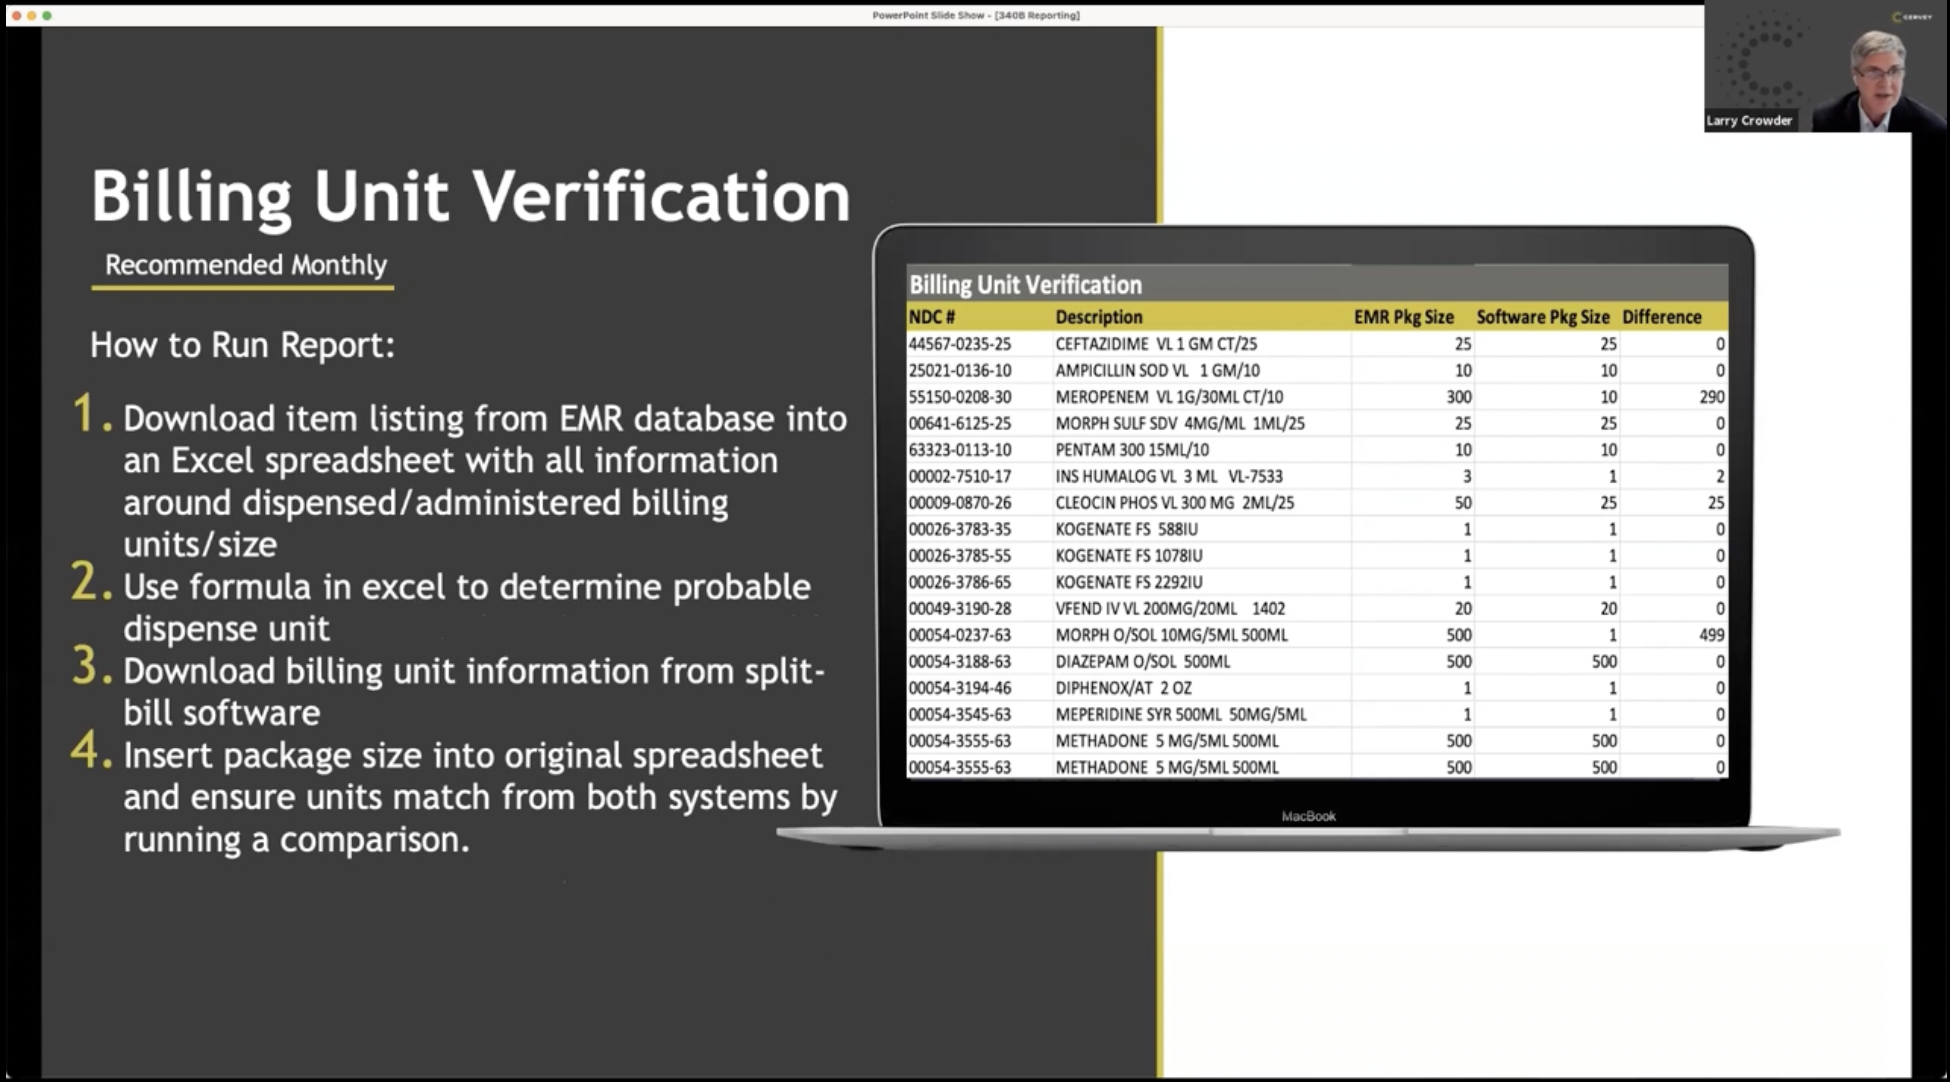 How to Run the Billing Unit Verification Report